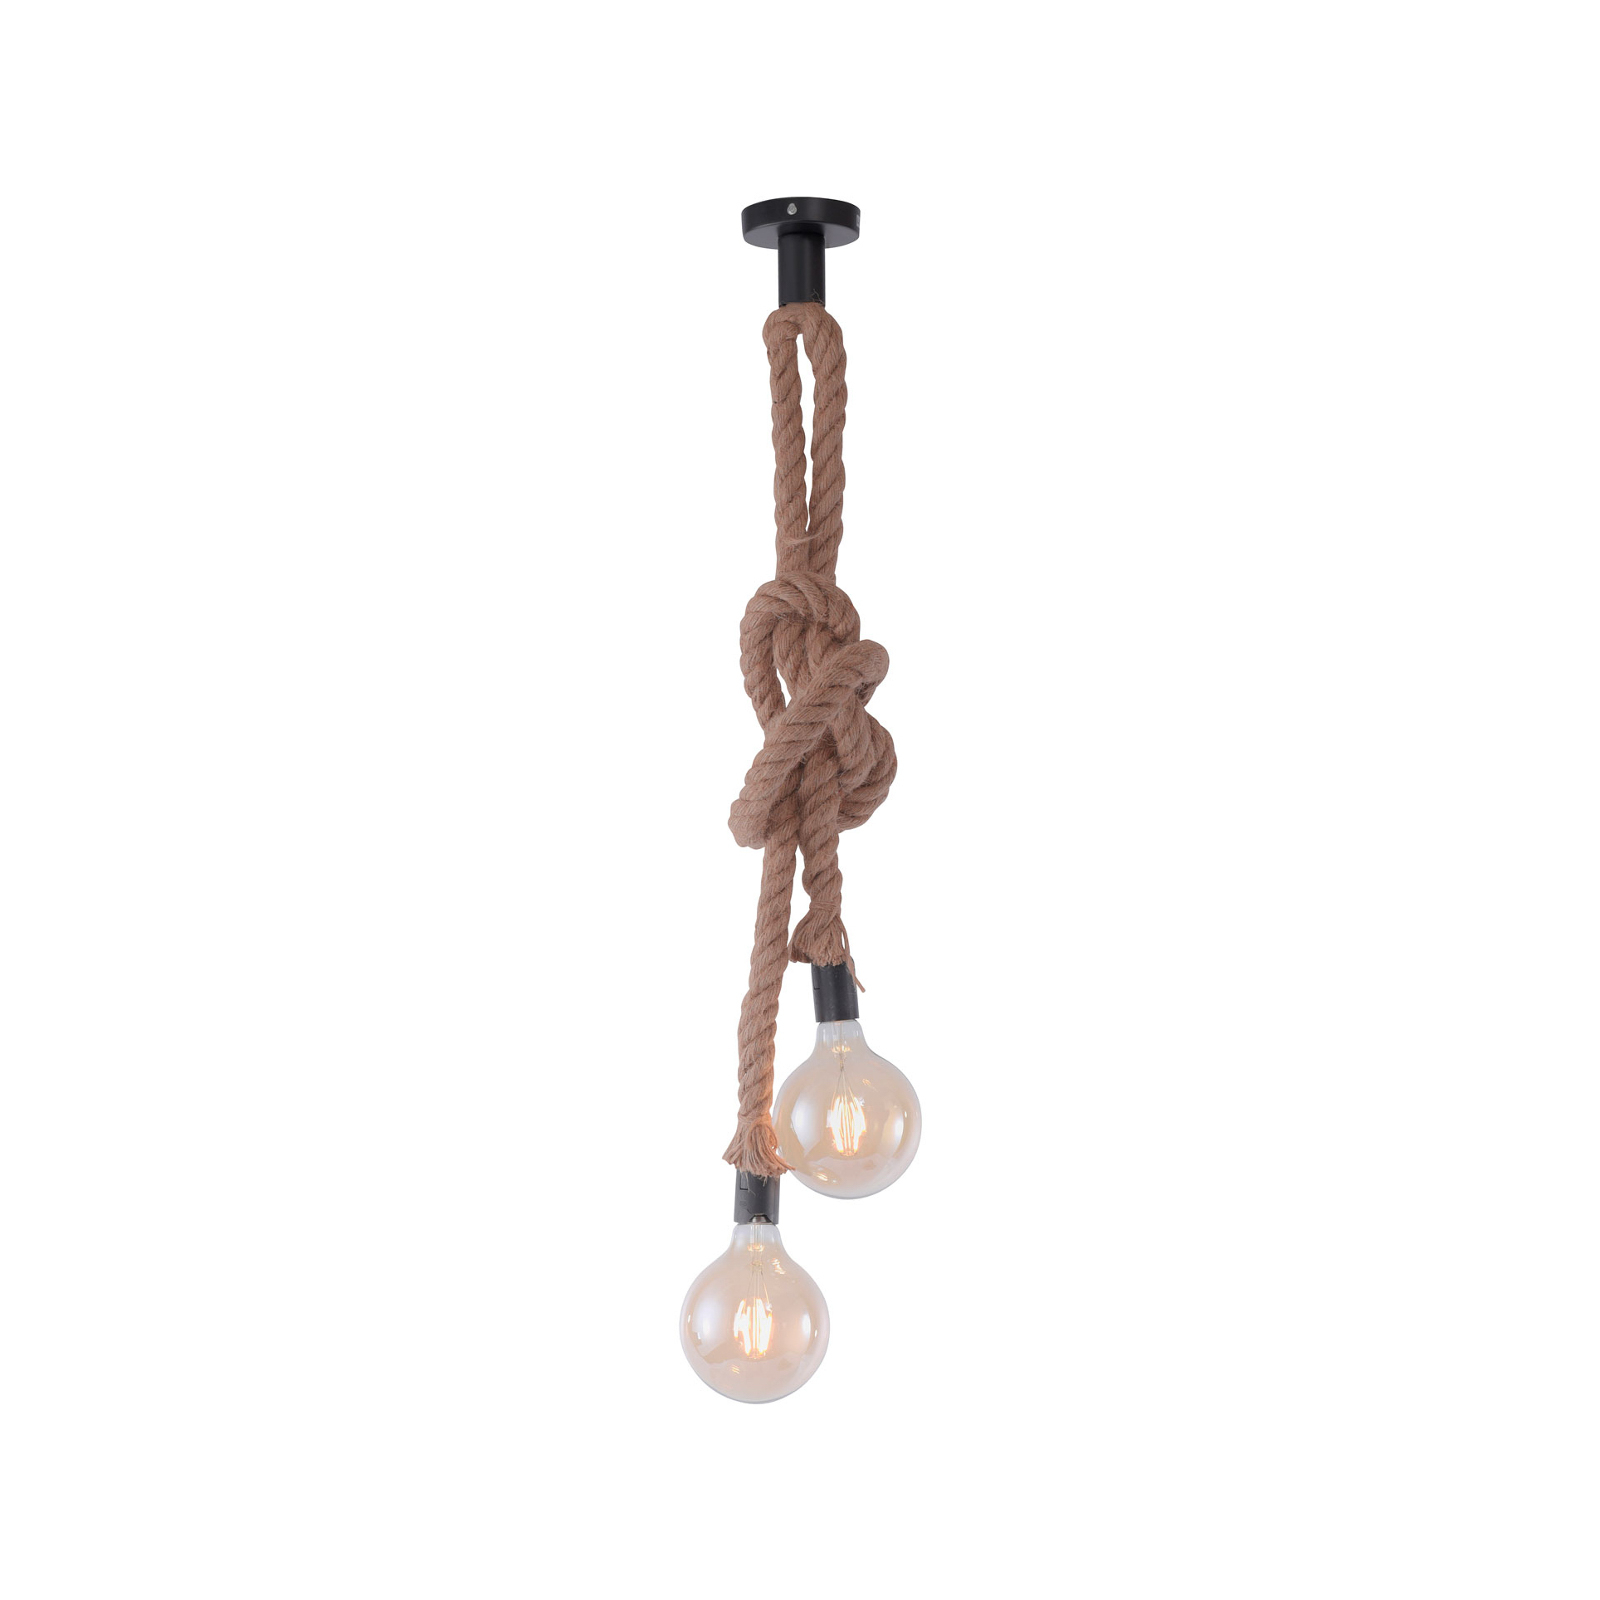 Rope pendant light with rope, two-bulb